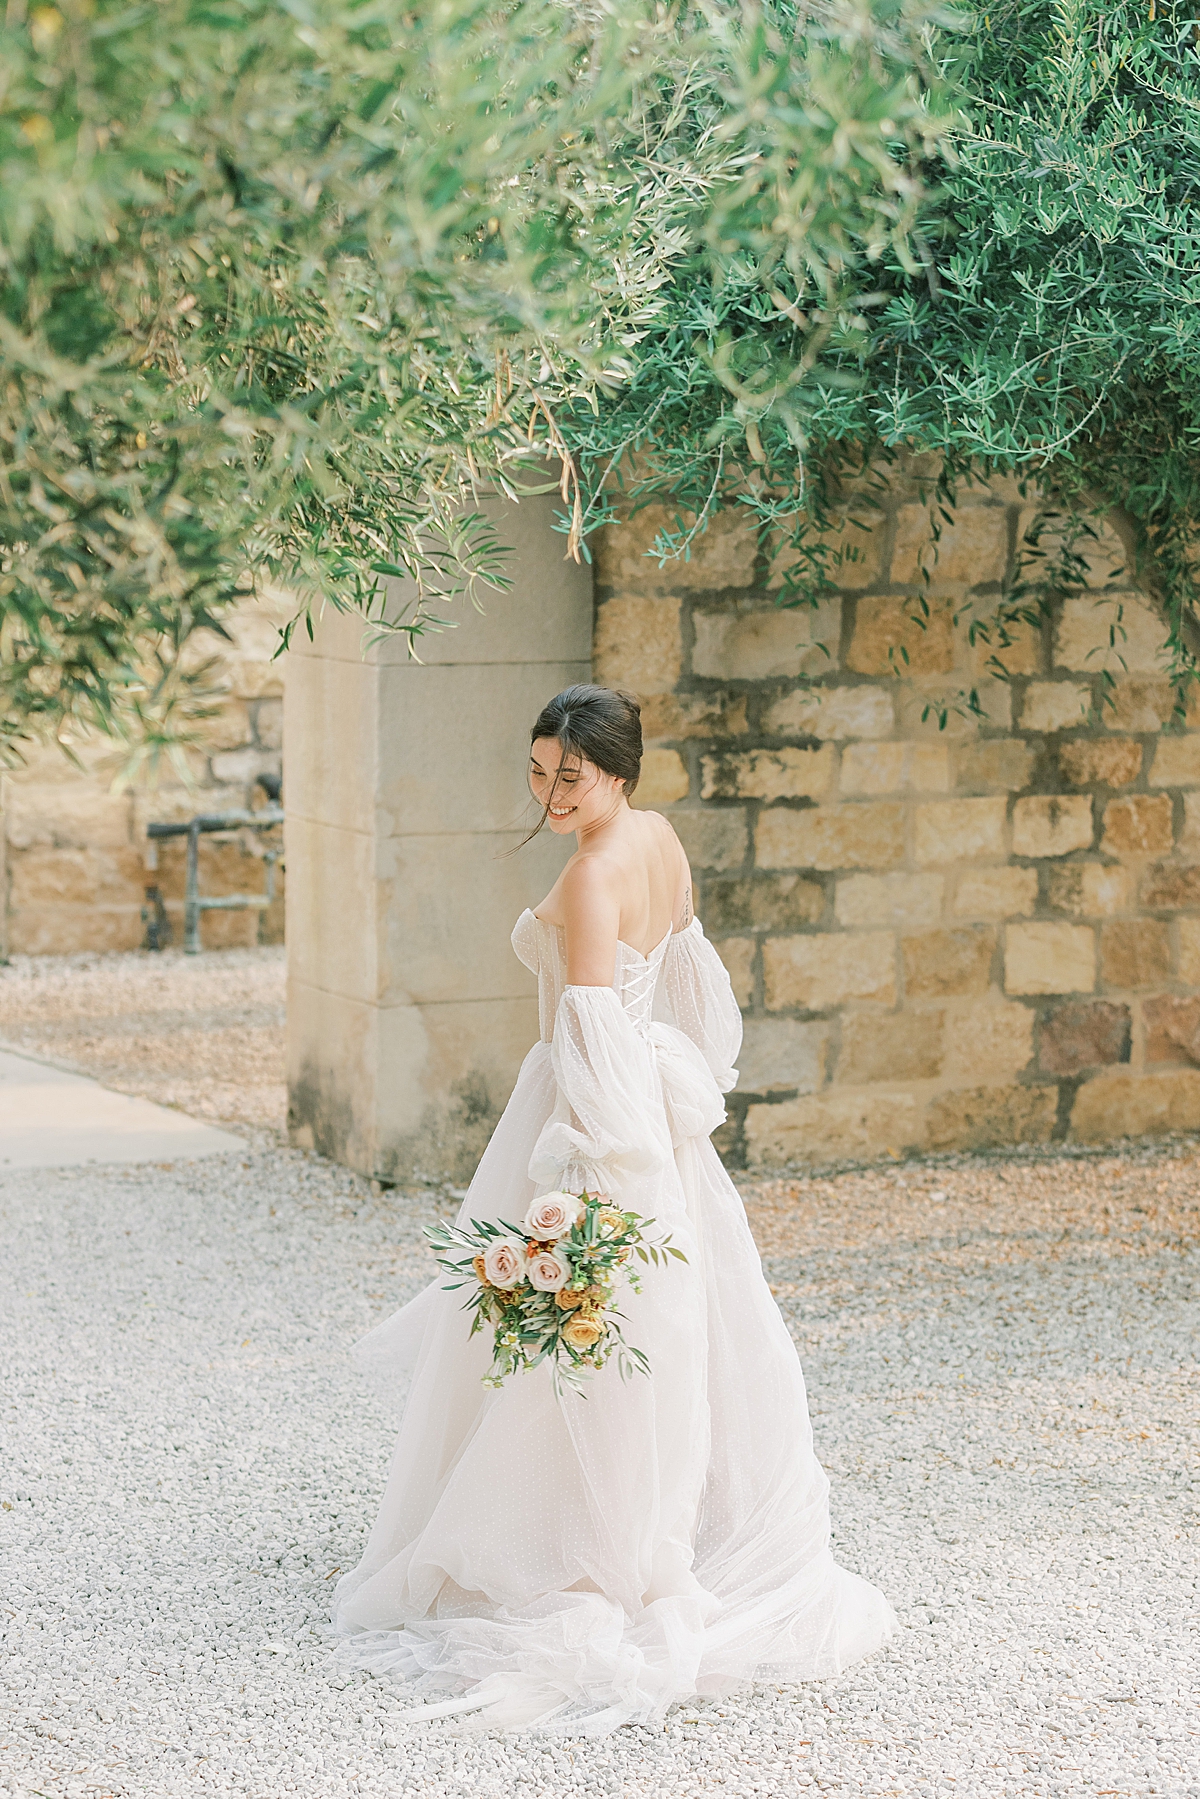 The bride holding all the layers of her dress at this Sunstone Villa Wedding editorial.